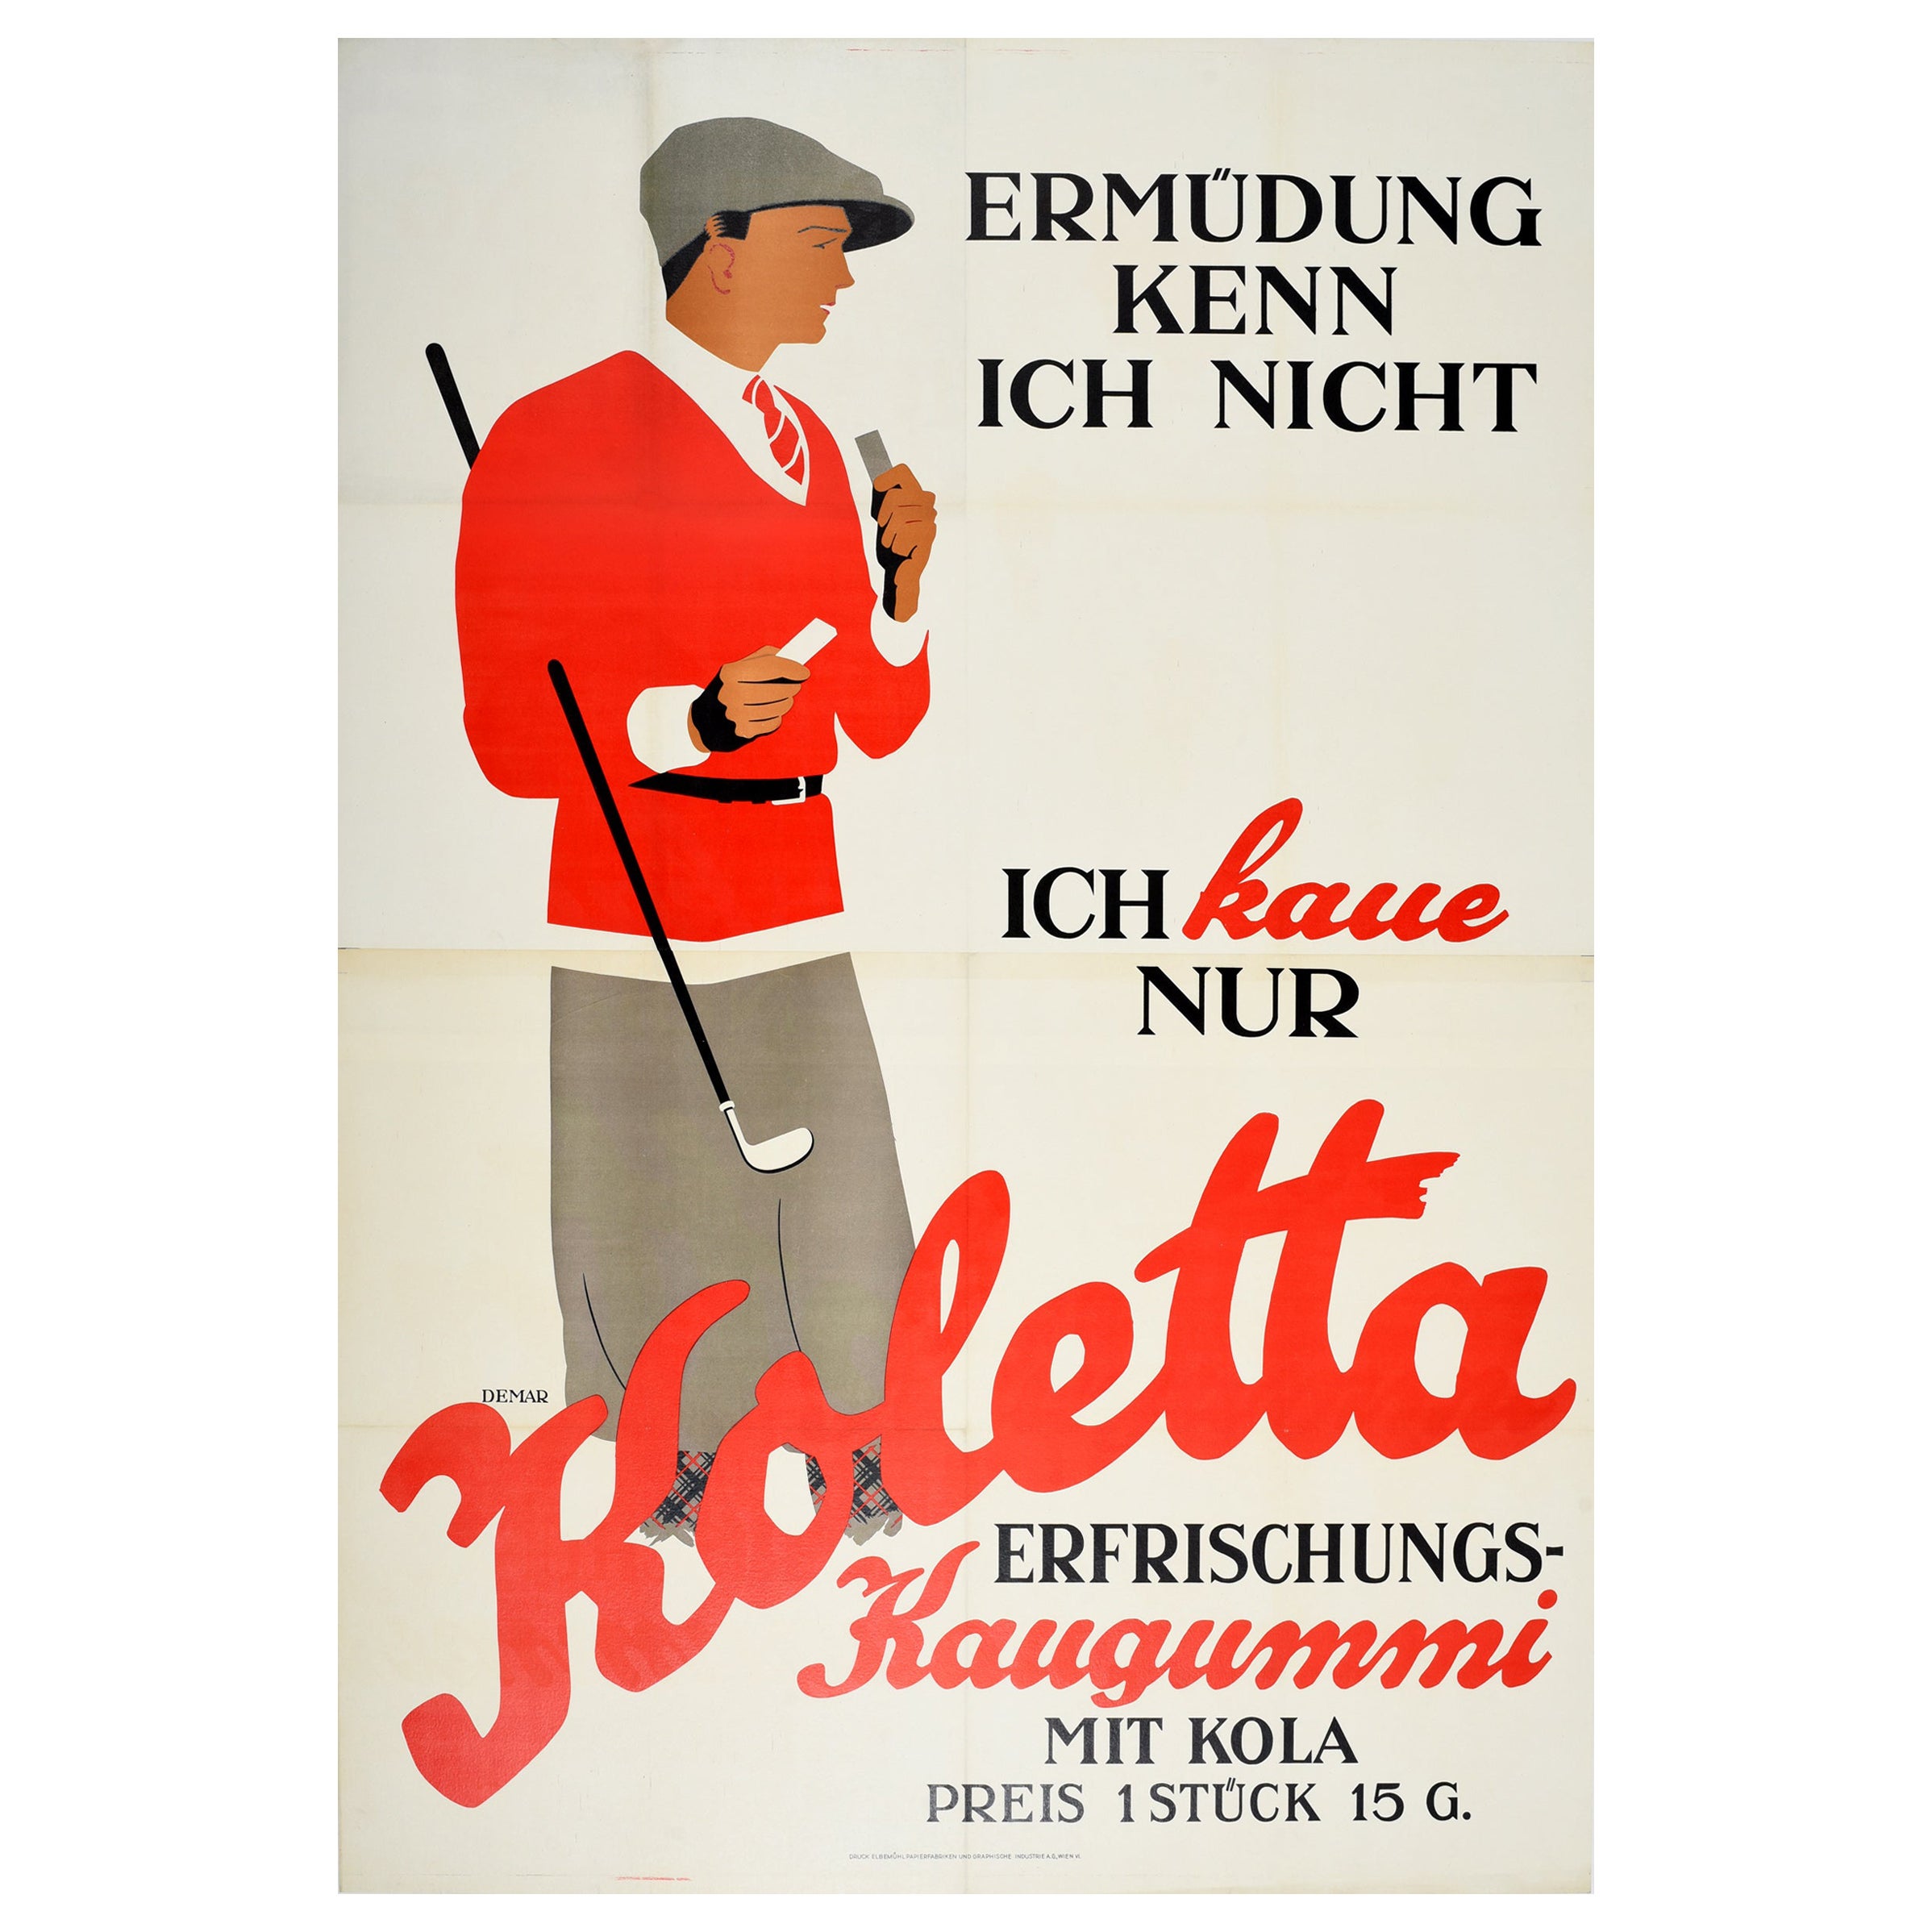 Original Vintage Poster For Koletta Chewing Gum With Cola Golfer Advertising Art For Sale